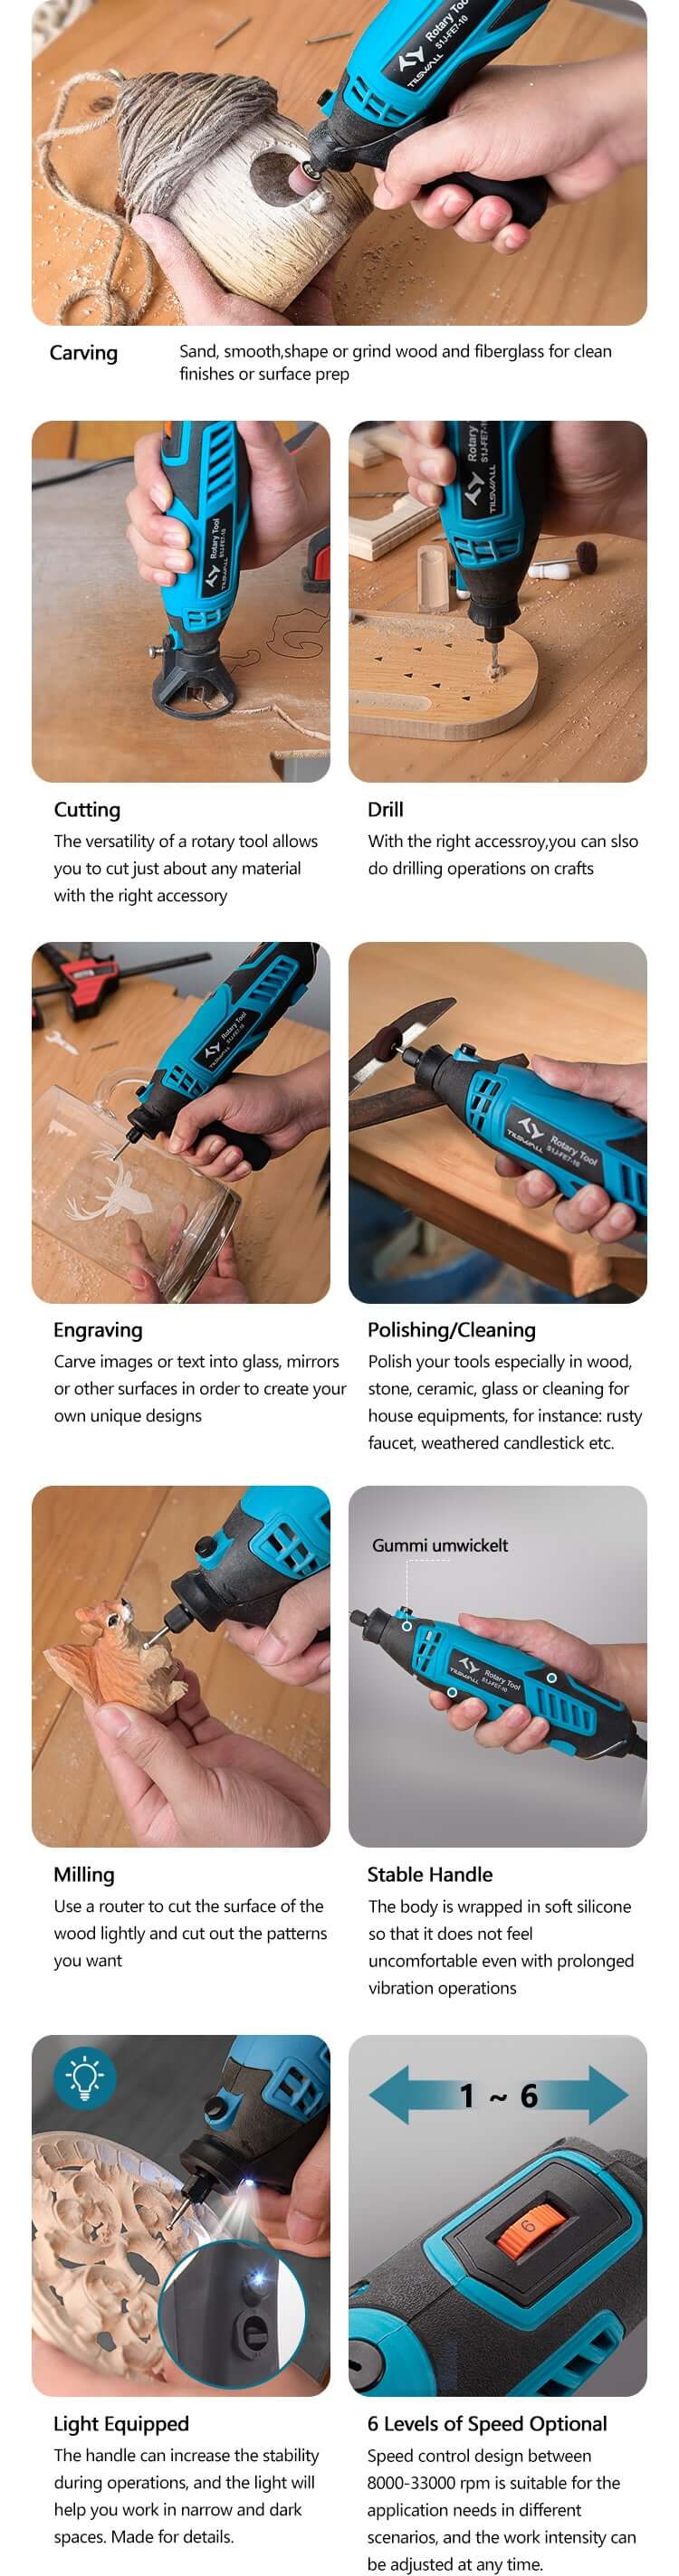 multiple uses for the rotary tool kit